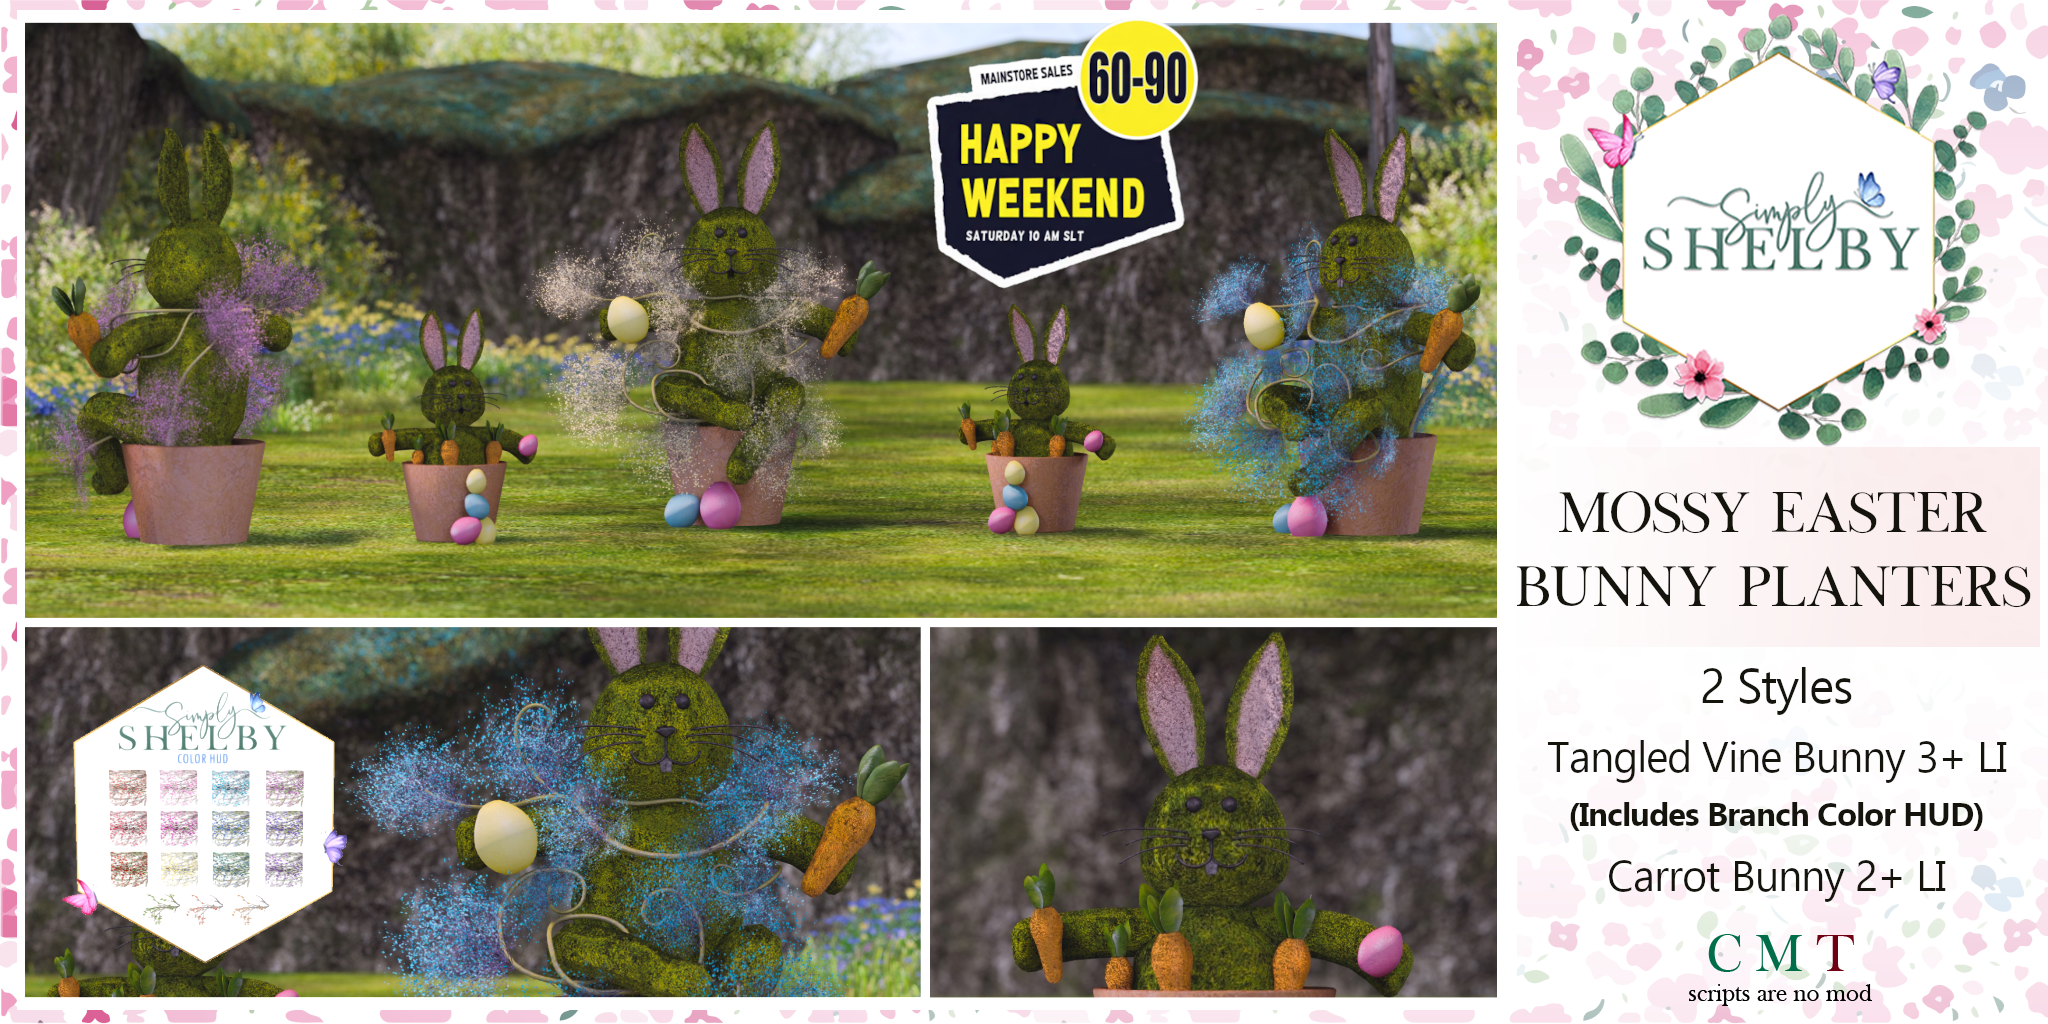 Simply Shelby – Mossy Easter Bunny Planters